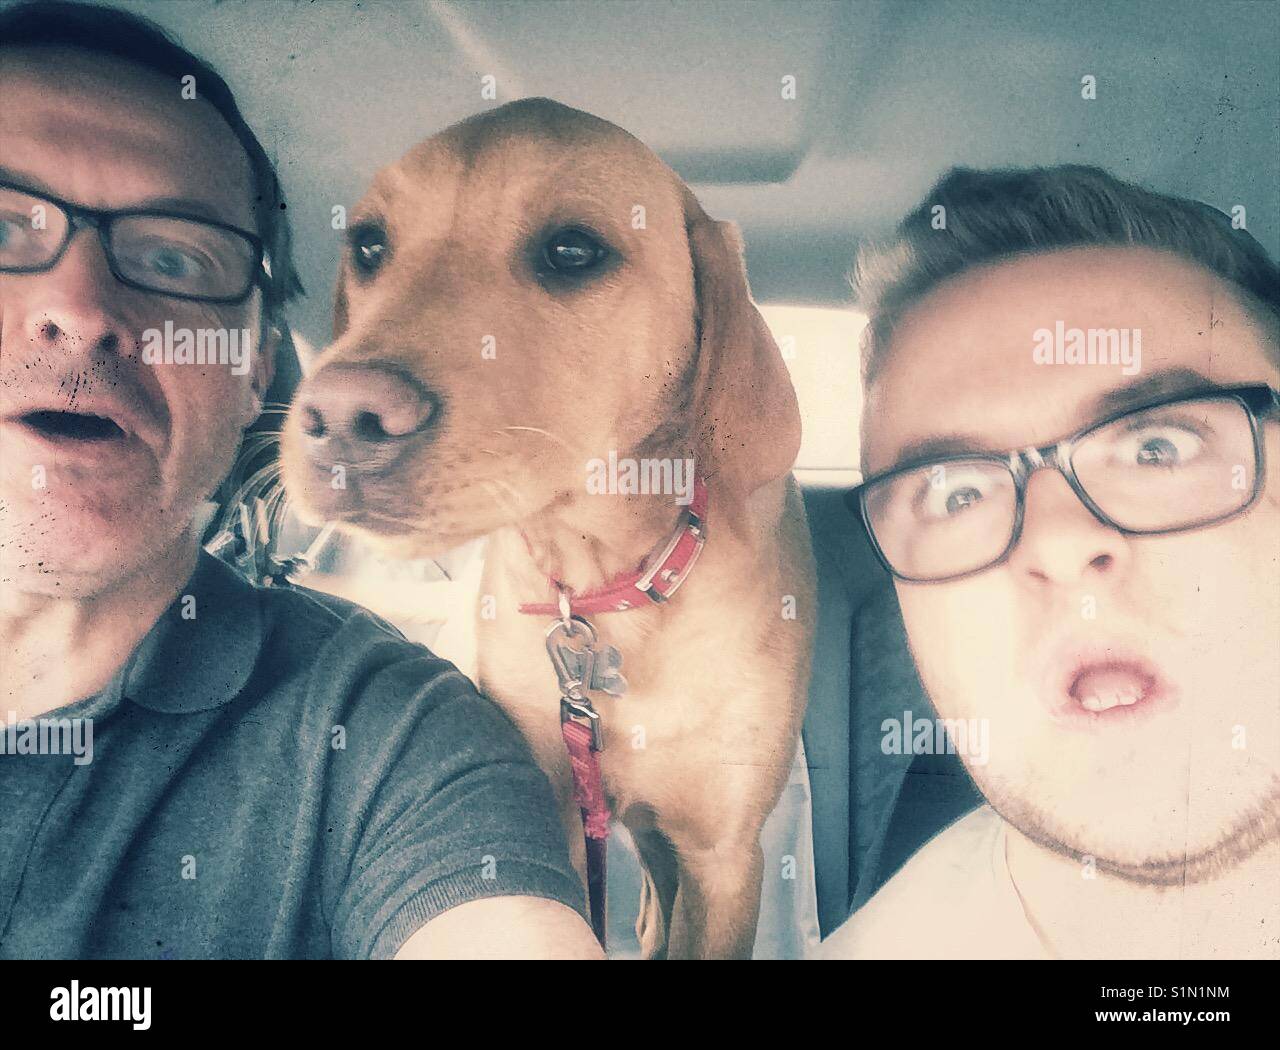 A father and son pulling silly faces and having fun with their dog in a car selfie. Stock Photo